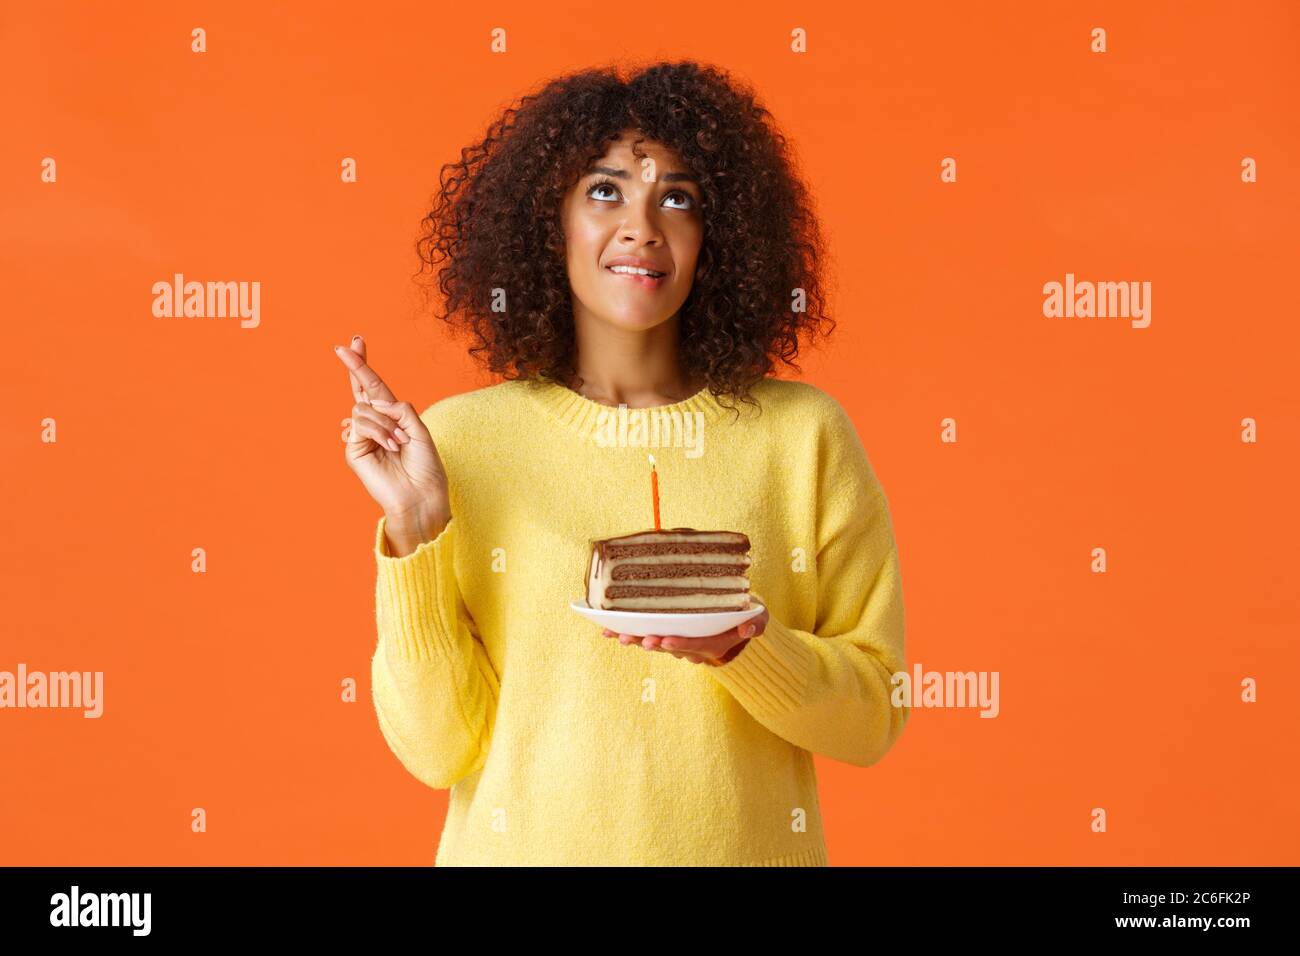 Waist-up portrait hopeful cute dreamy, birthday girl with afro haircut, biting lip and desire wish come true, look up sky praying, cross fingers good Stock Photo